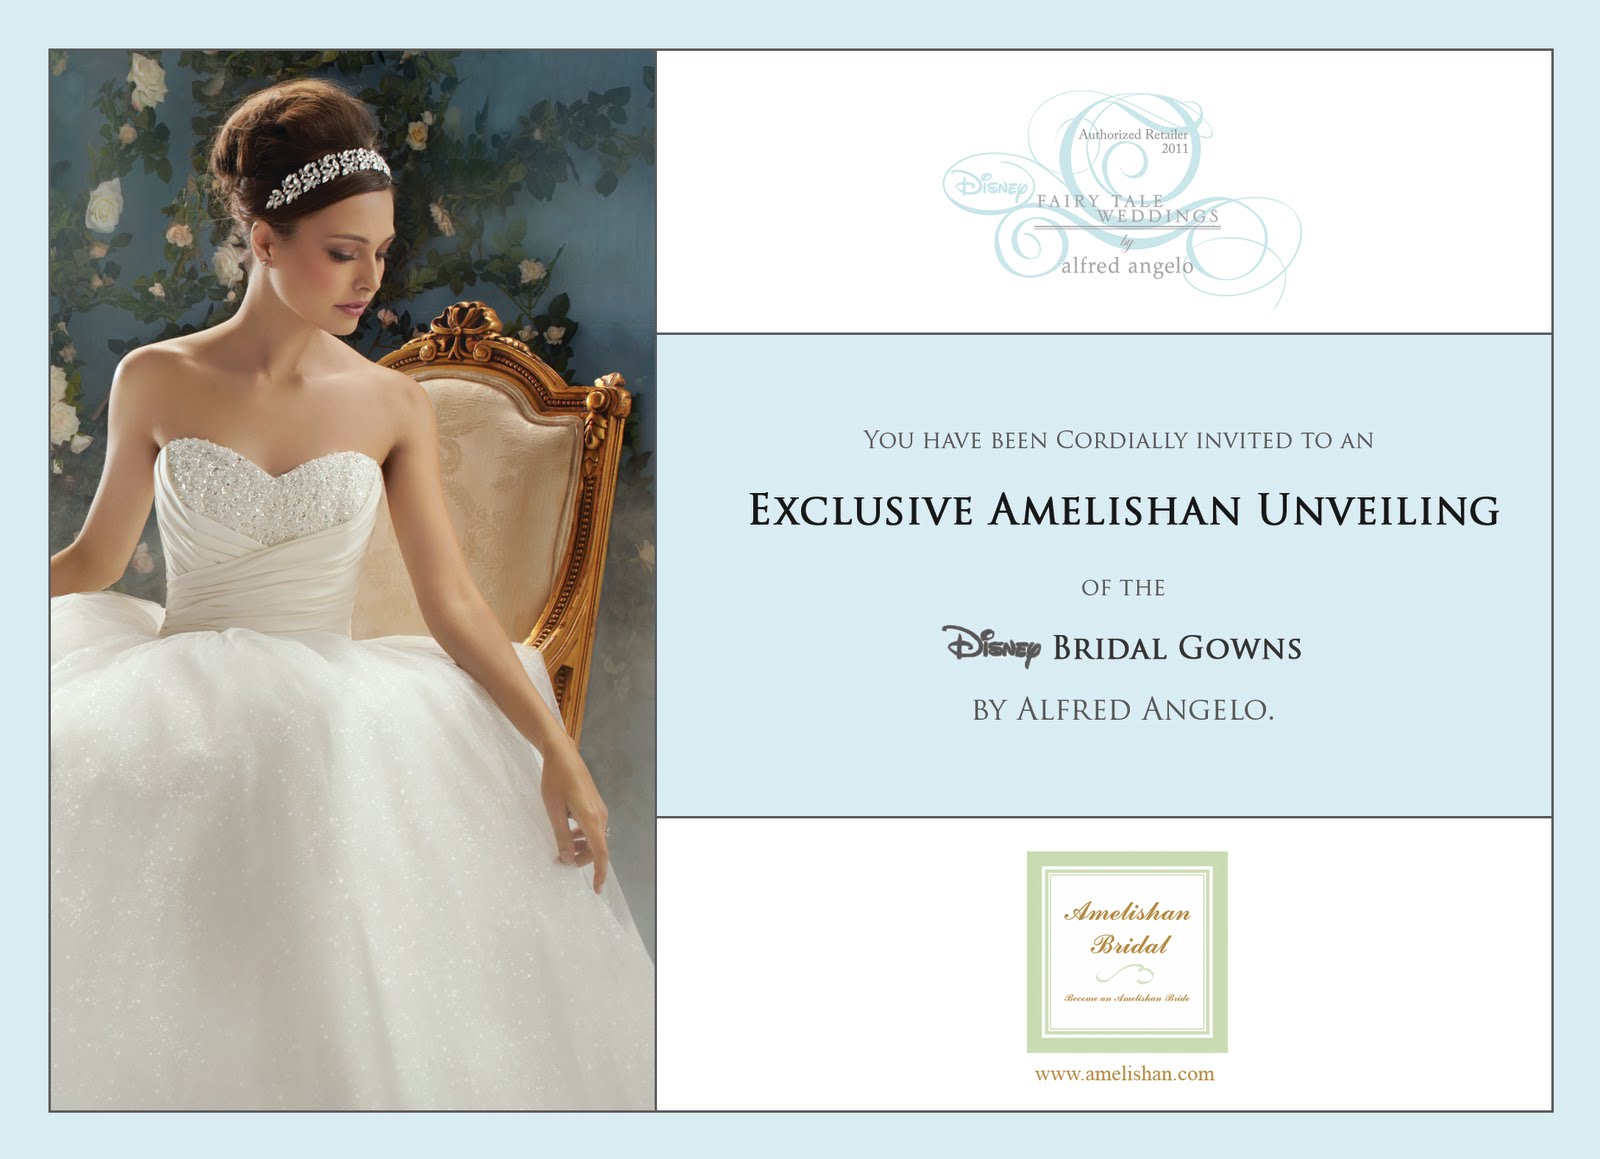 of our Disney Bridal Gowns